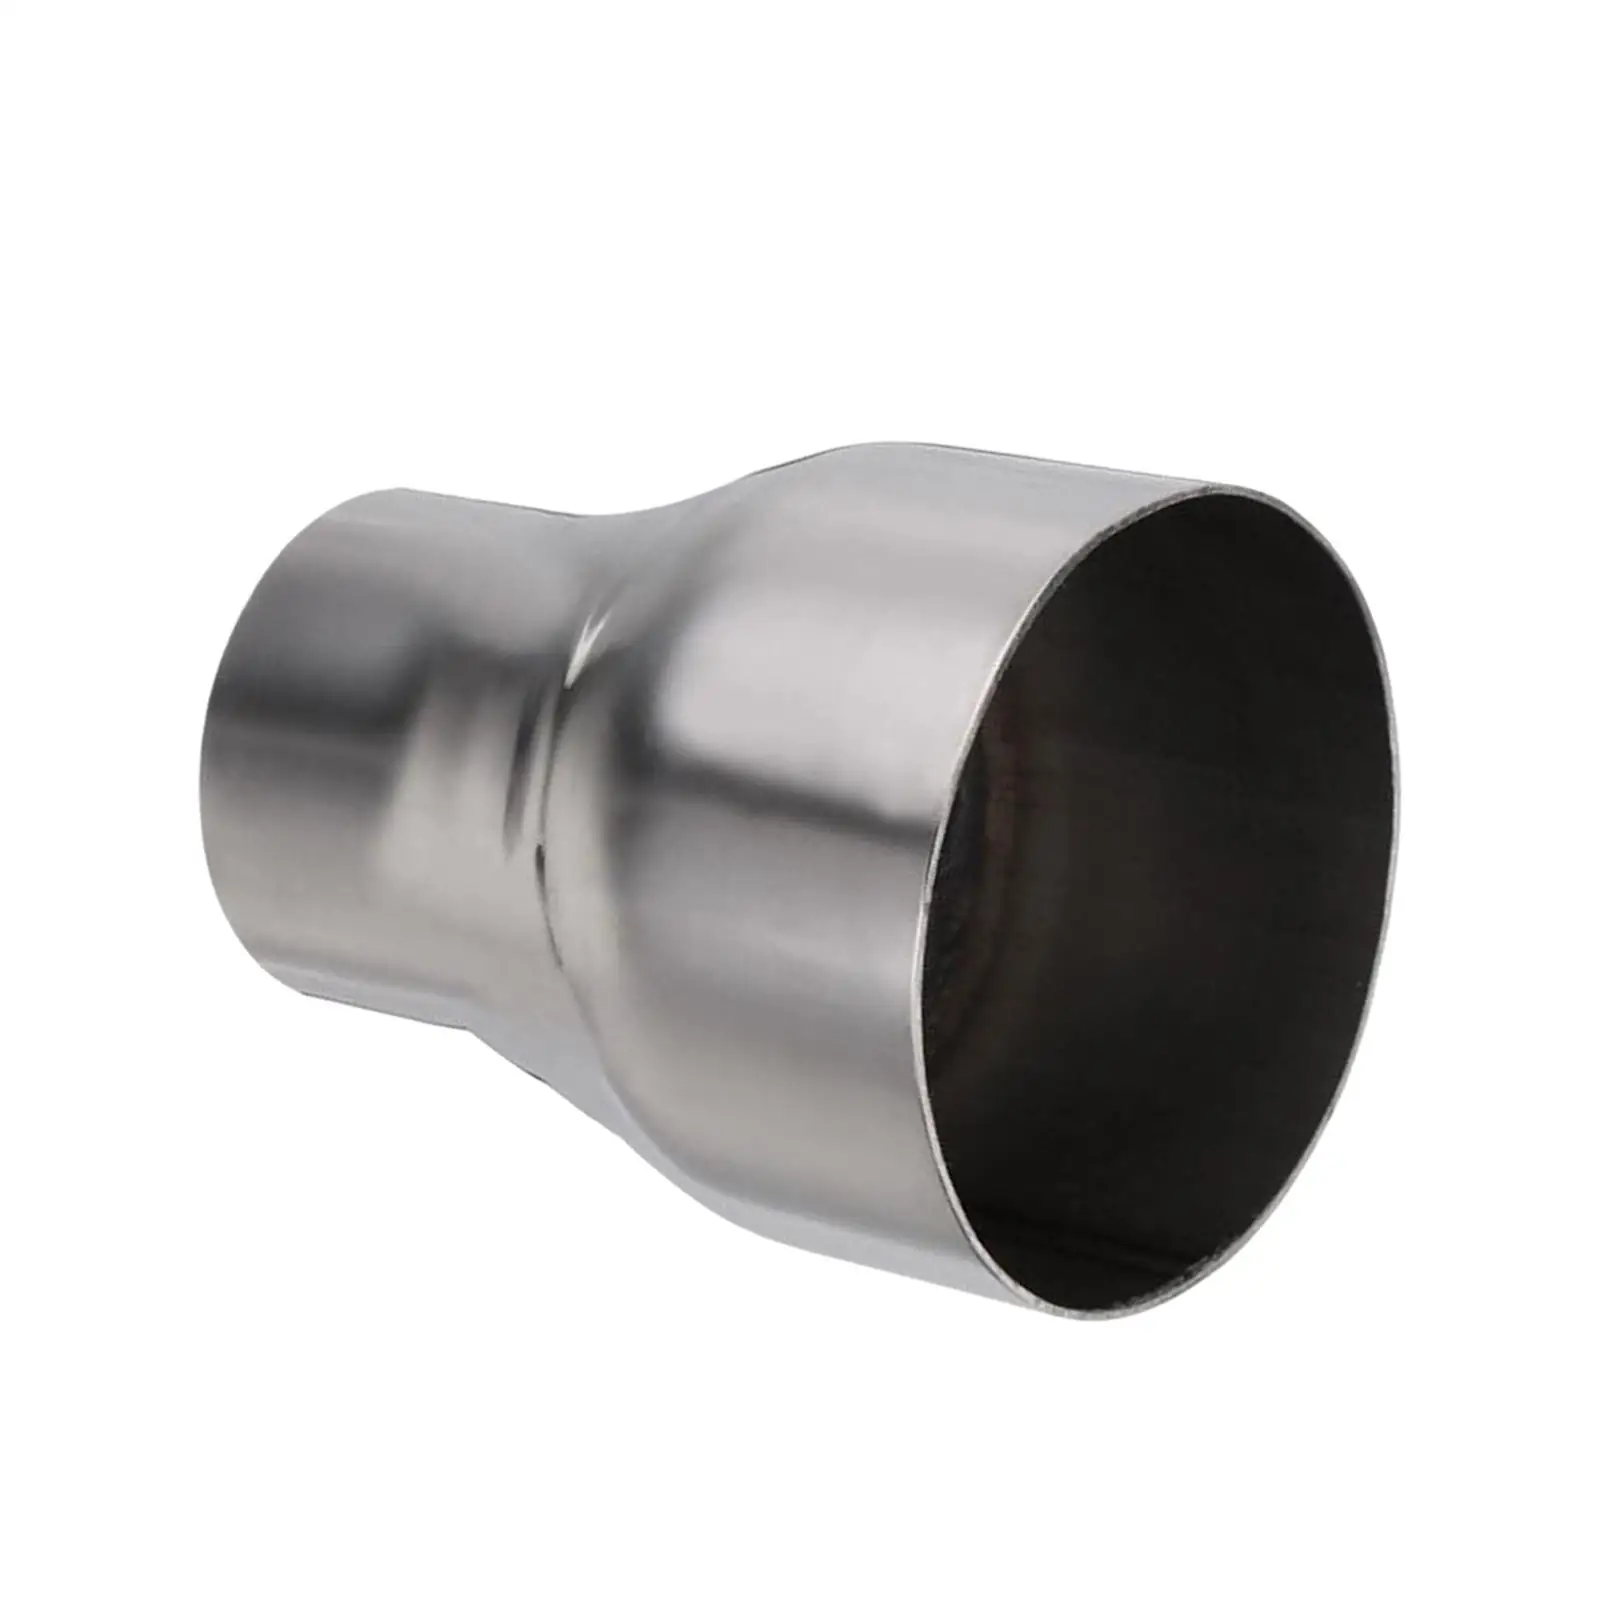 Durable Tailpipe Adapter High Performance Automotive Direct Replaces Parts Rustproof Stainless Steel Exhaust Pipe Connector